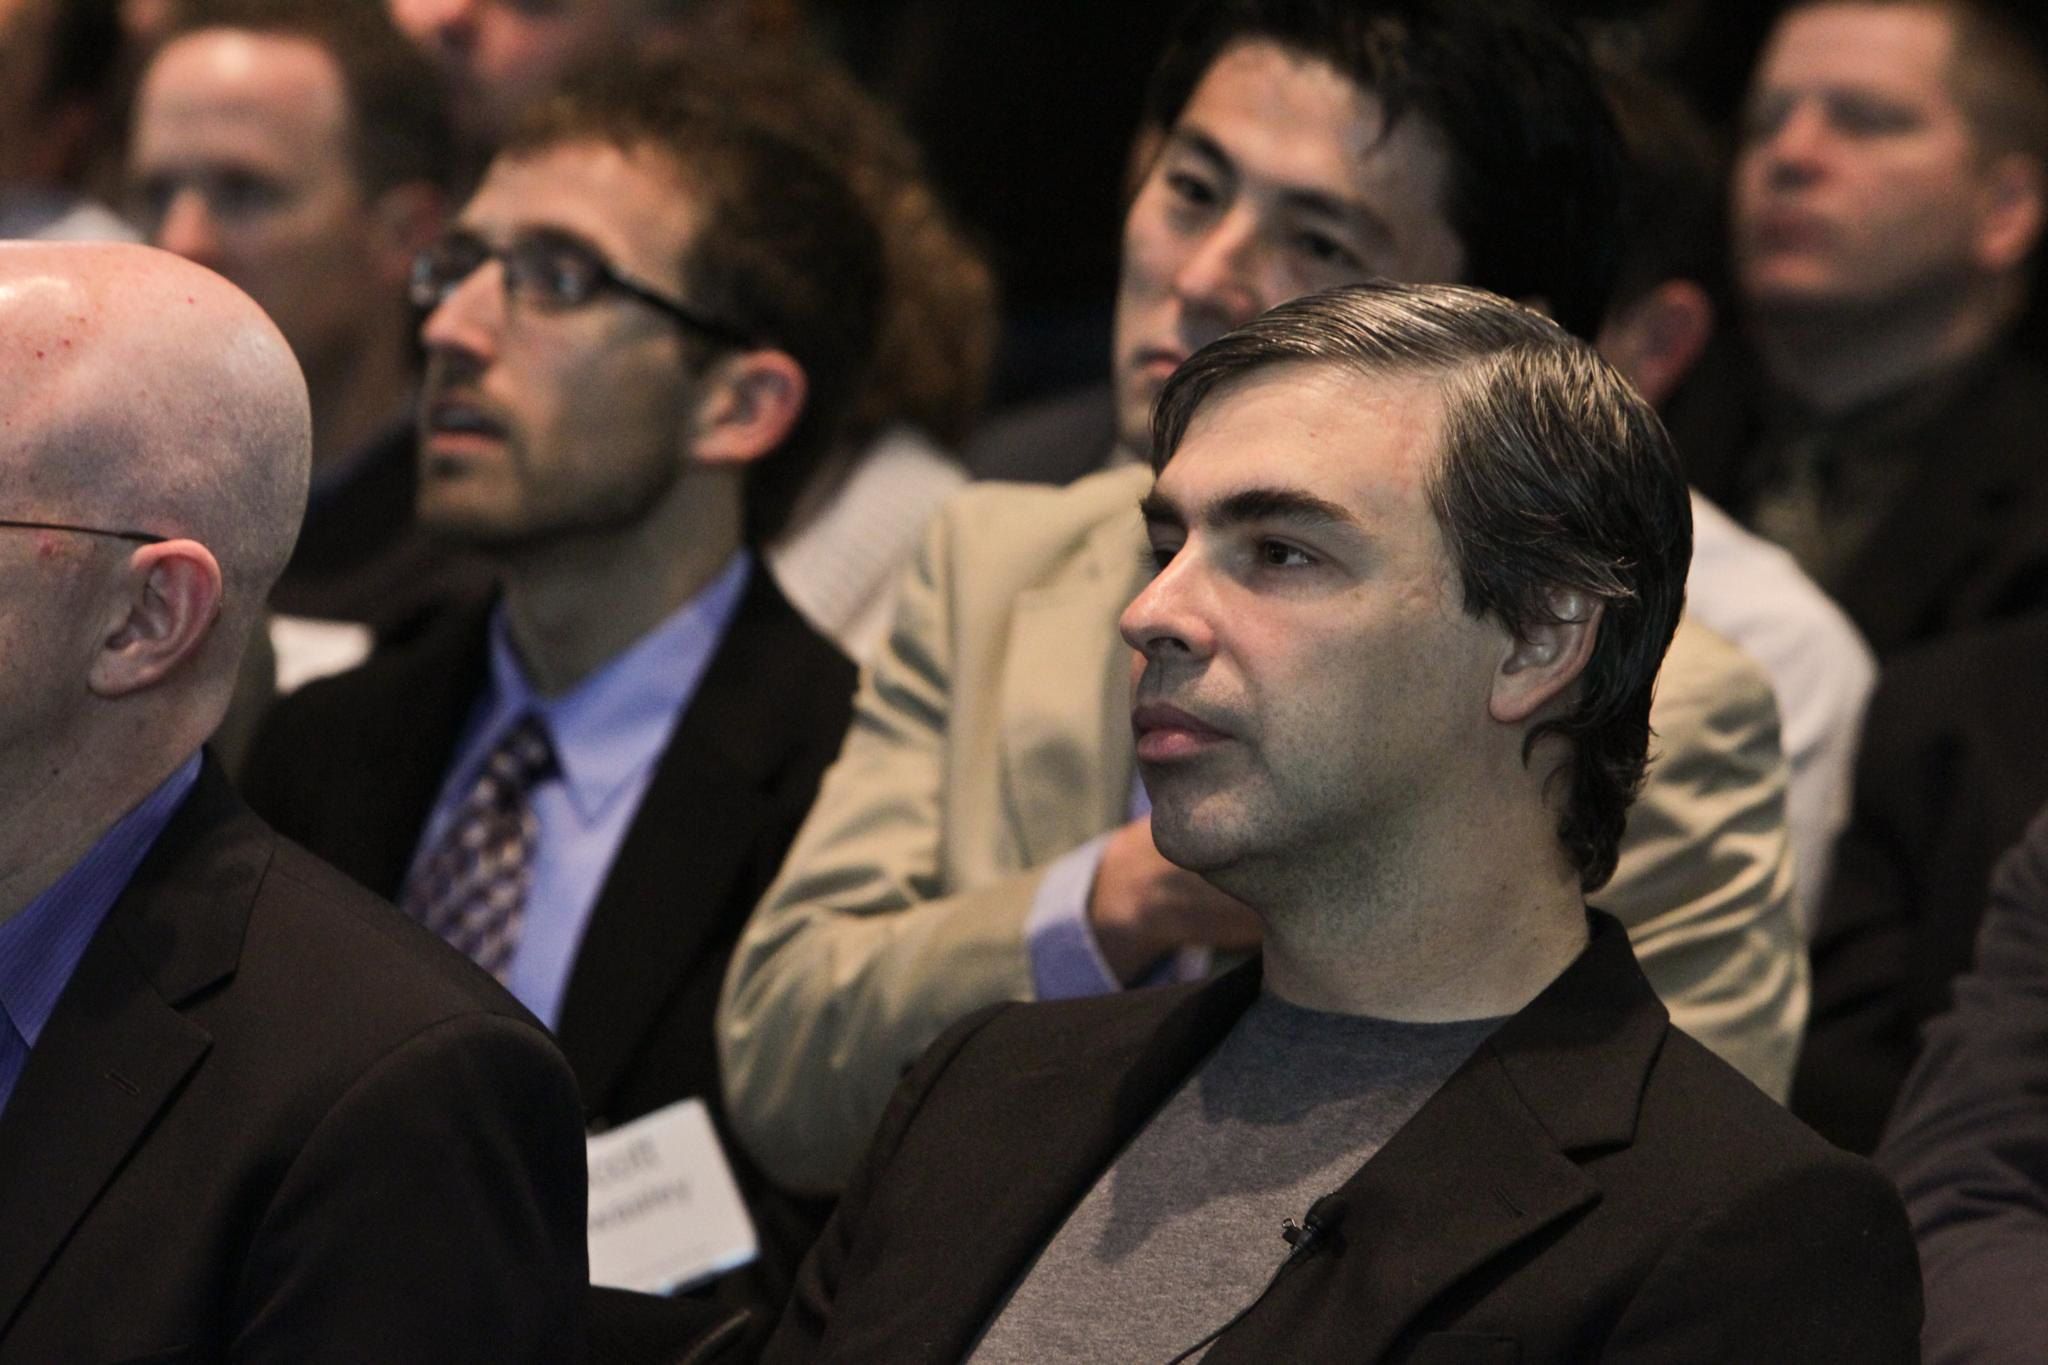 Larry Page, the co-founder of Google, sitting in an audience.